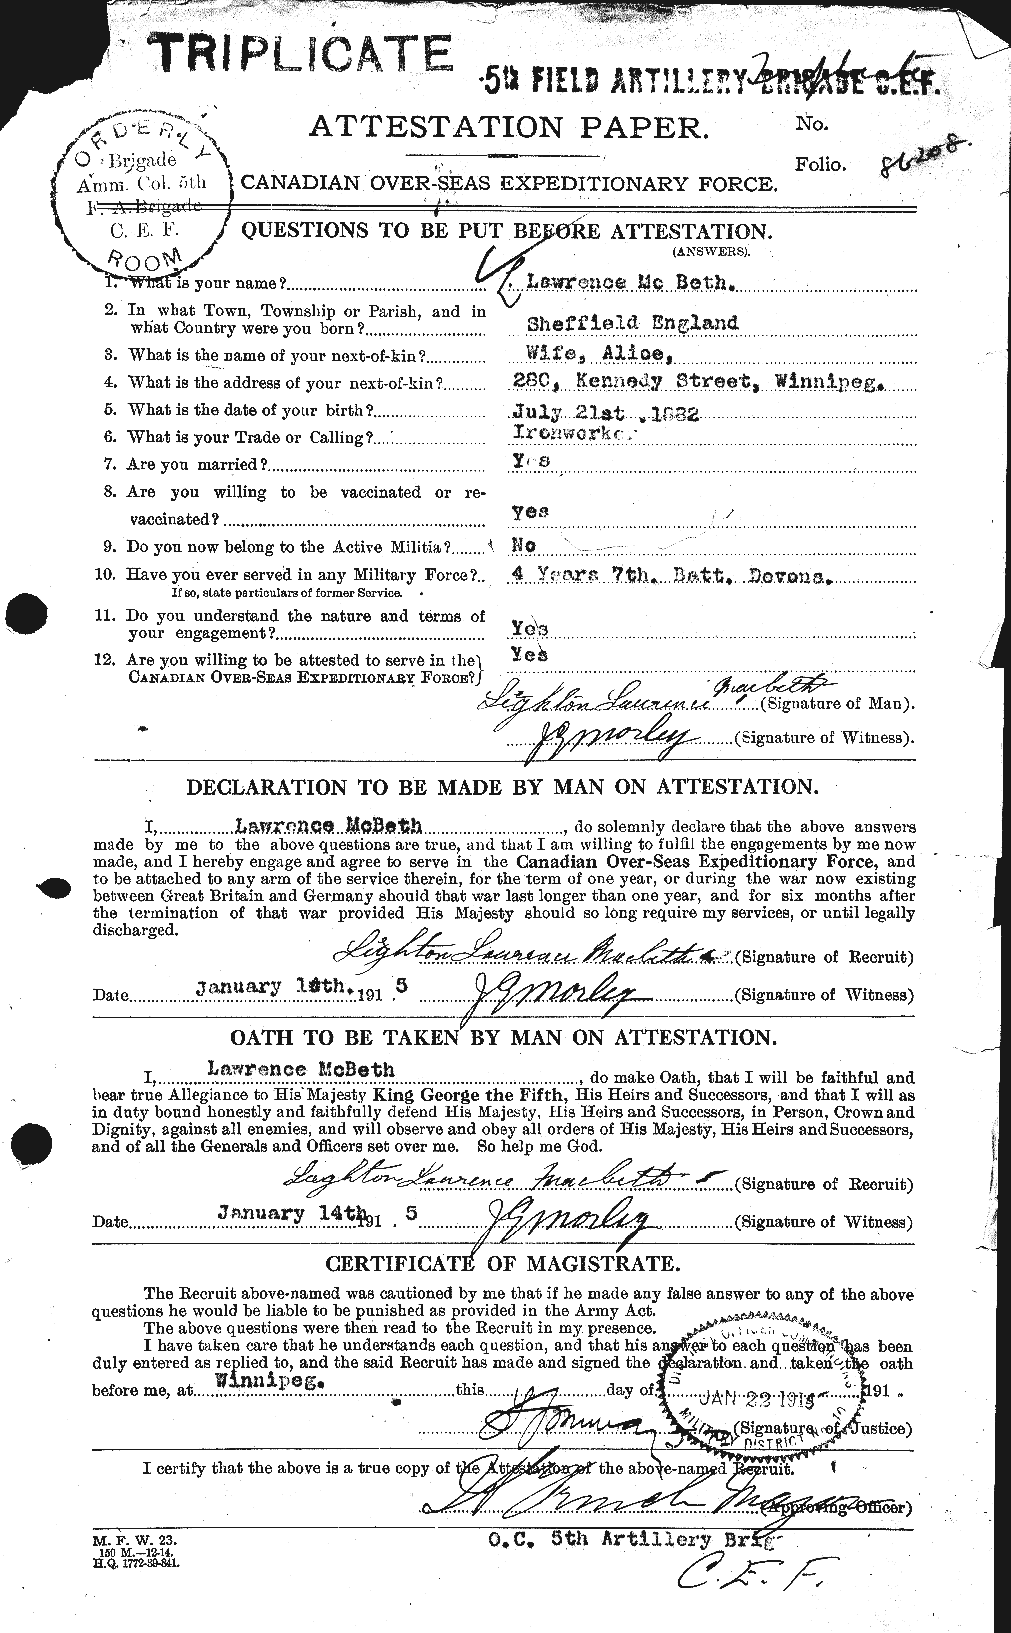 Personnel Records of the First World War - CEF 132109a